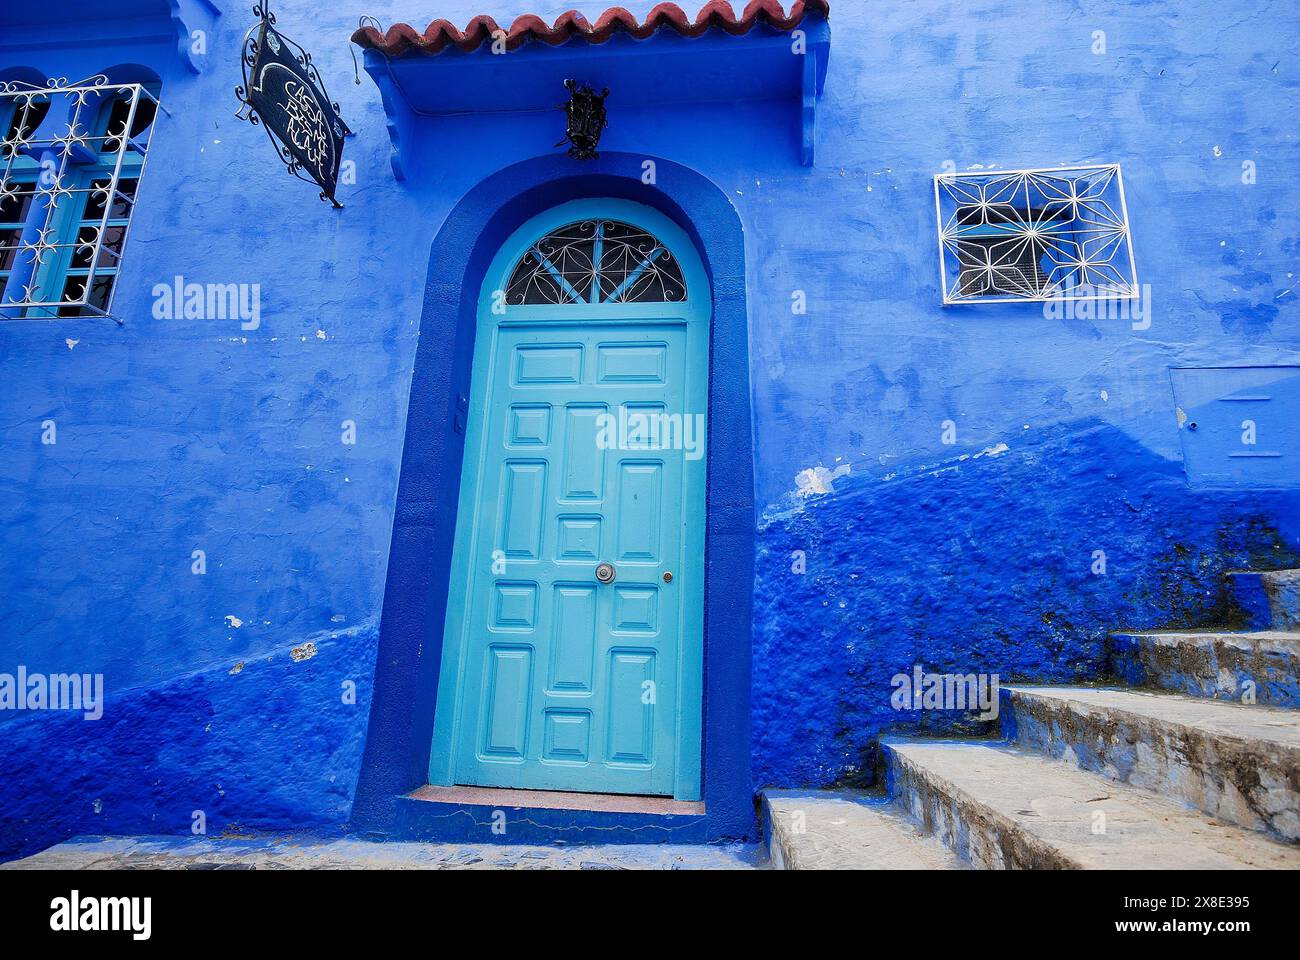 Blue town of Chefchaouen, Maroc Stock Photo